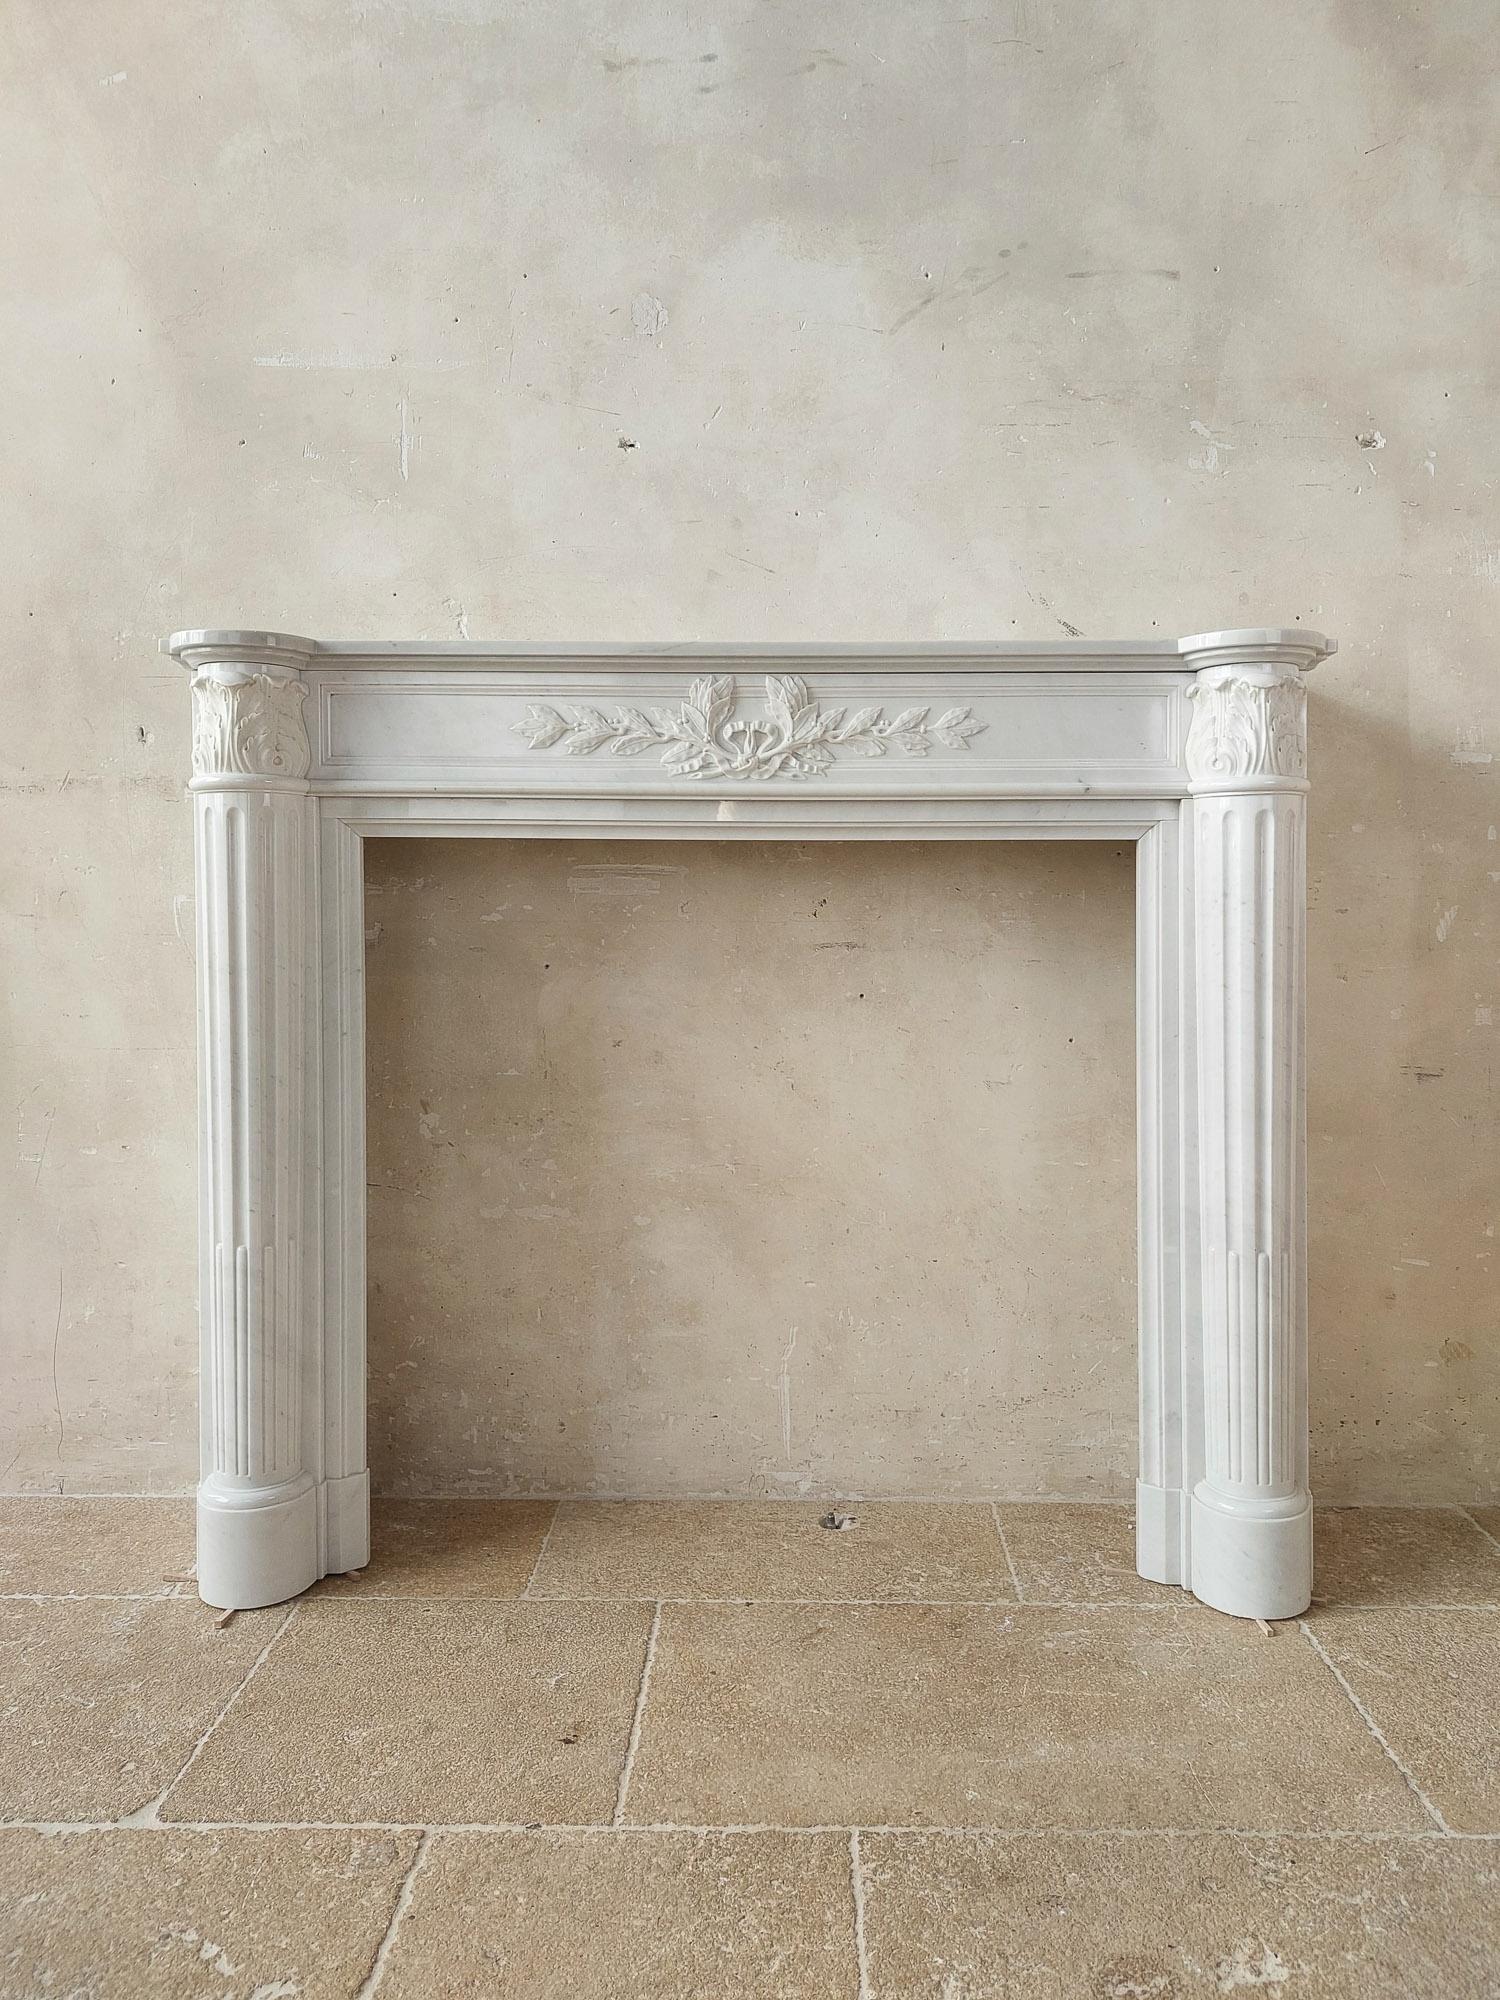 Antique Carrara marble Louis Seize mantle piece from the 19th century. Louis XVI style fireplace in white marble with finely carved laurel and acanthus decorations and fluted jambs.

Dimensions: H 119 x w 133 x d 33 cm
Marble inner dimensions: H